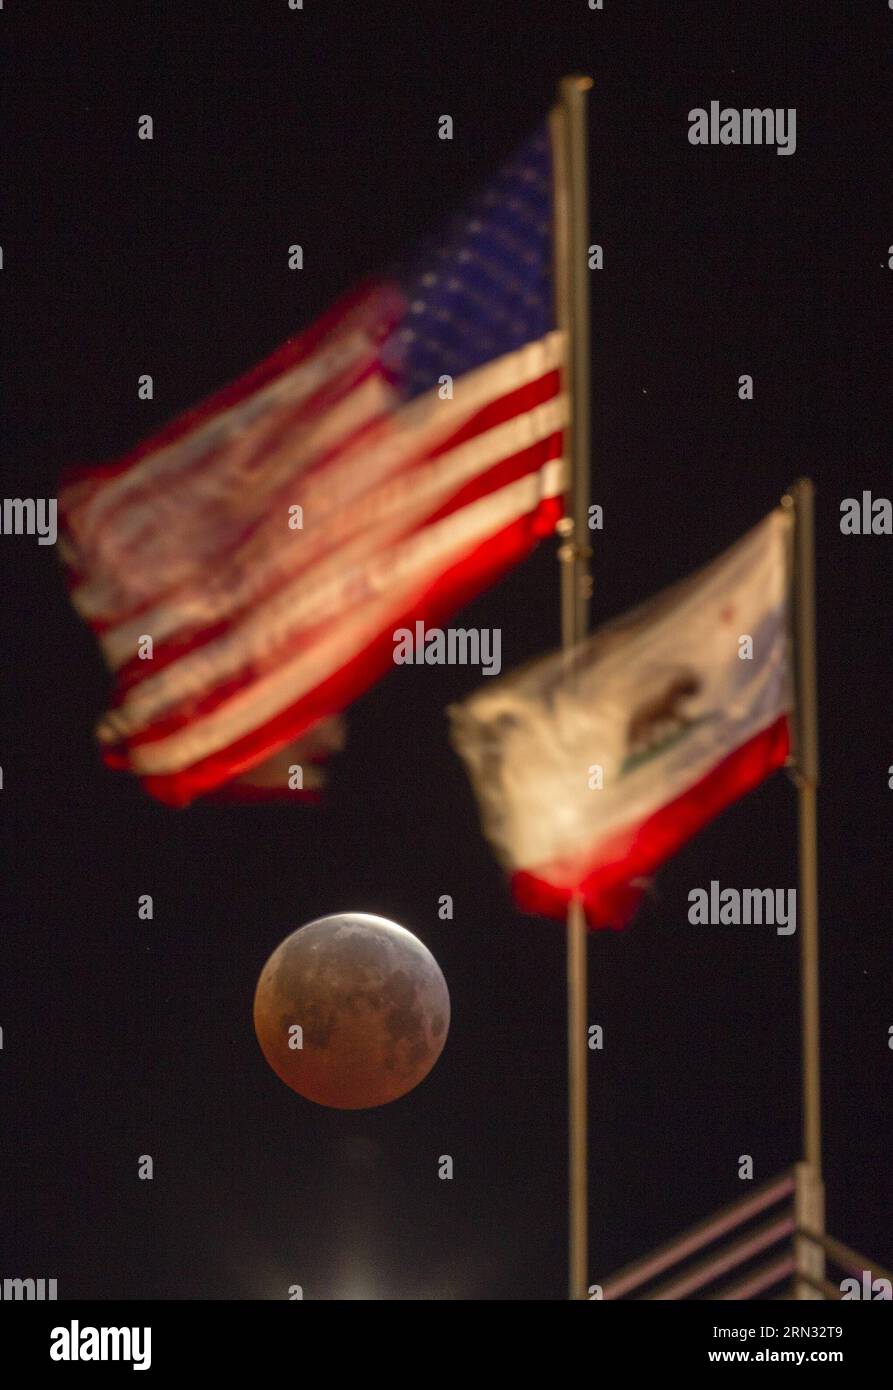 (150404) -- LOS ANGELES, April 4, 2015 -- The moon, with an orange hue that gives it the famous name blood moon , is seen behind the flags of U.S. and California State at Santa Monica Beach in Santa Monica, California, during a total lunar eclipse on April 4, 2015. According to astronomical data, the eclipse is the shortest one since the 21st century as the totality lasted only for 12 minutes. ) U.S.-LOS ANGELES-ECLIPSE ZhaoxHanrong PUBLICATIONxNOTxINxCHN   Los Angeles April 4 2015 The Moon With to Orange Hue Thatcher Gives IT The Famous Name Blood Moon IS Lakes behind The Flags of U S and Cal Stock Photo